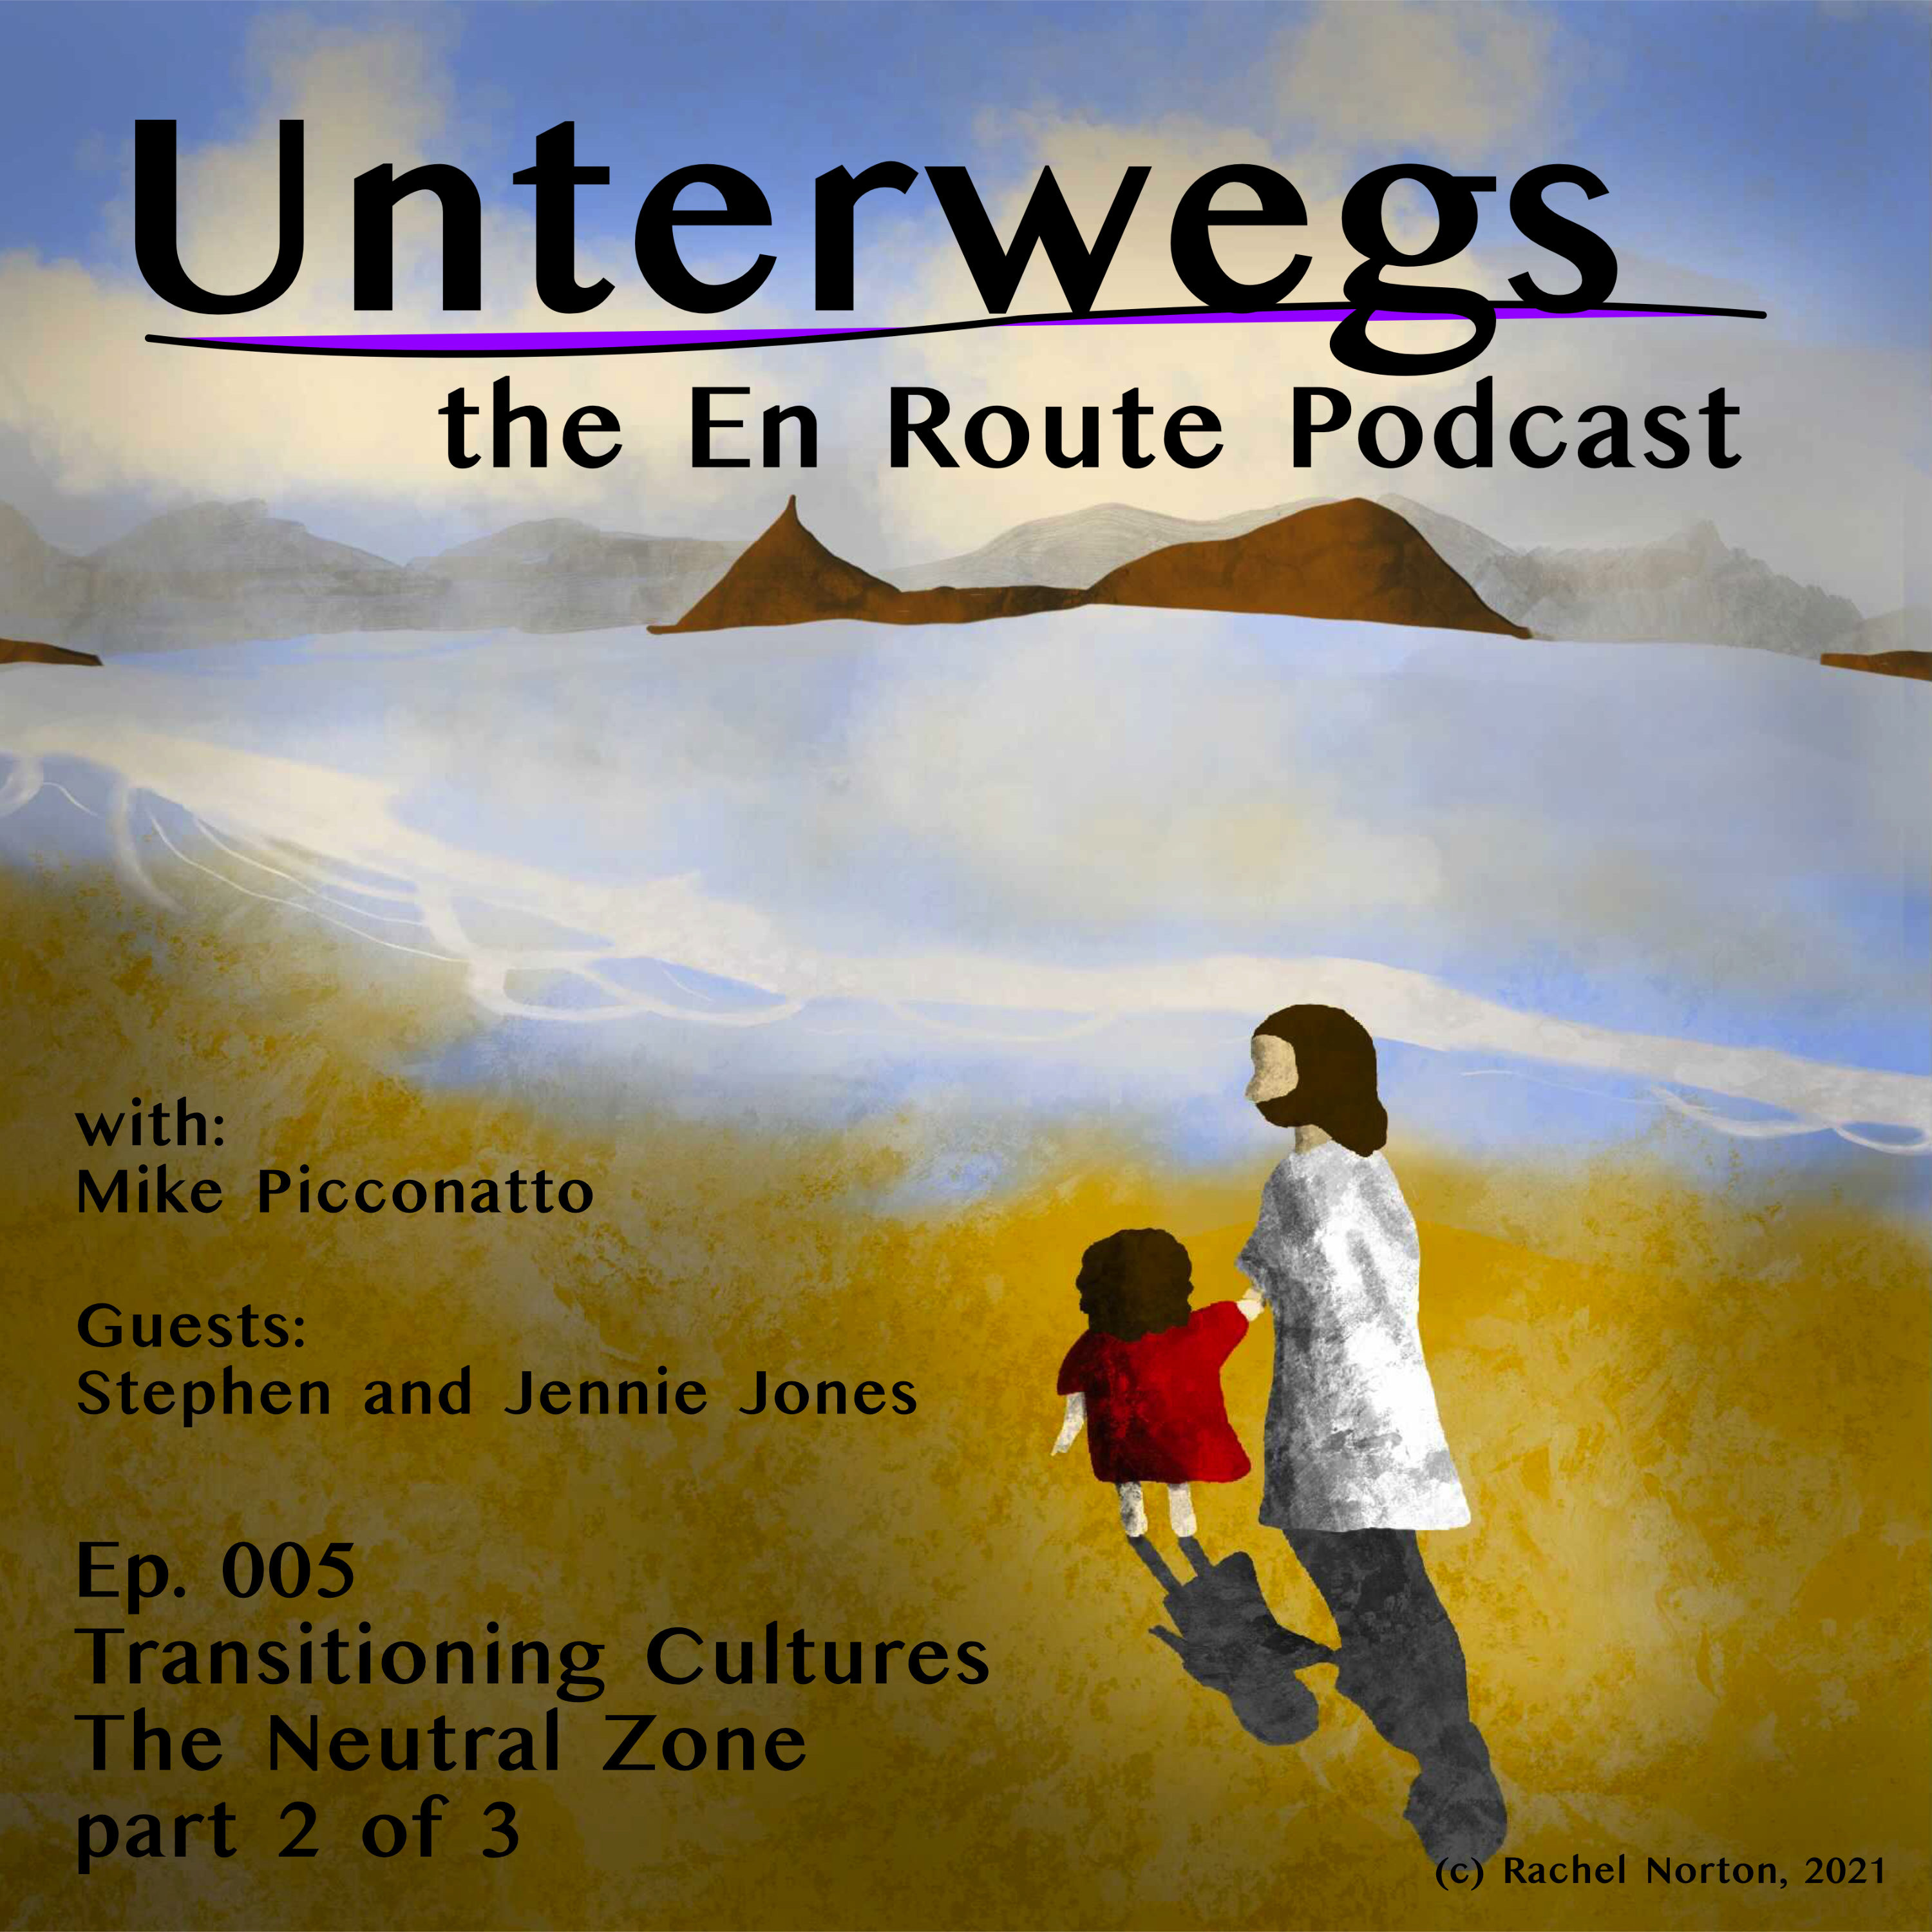 Episode 005 - The Neutral Zone - part 2 of 3